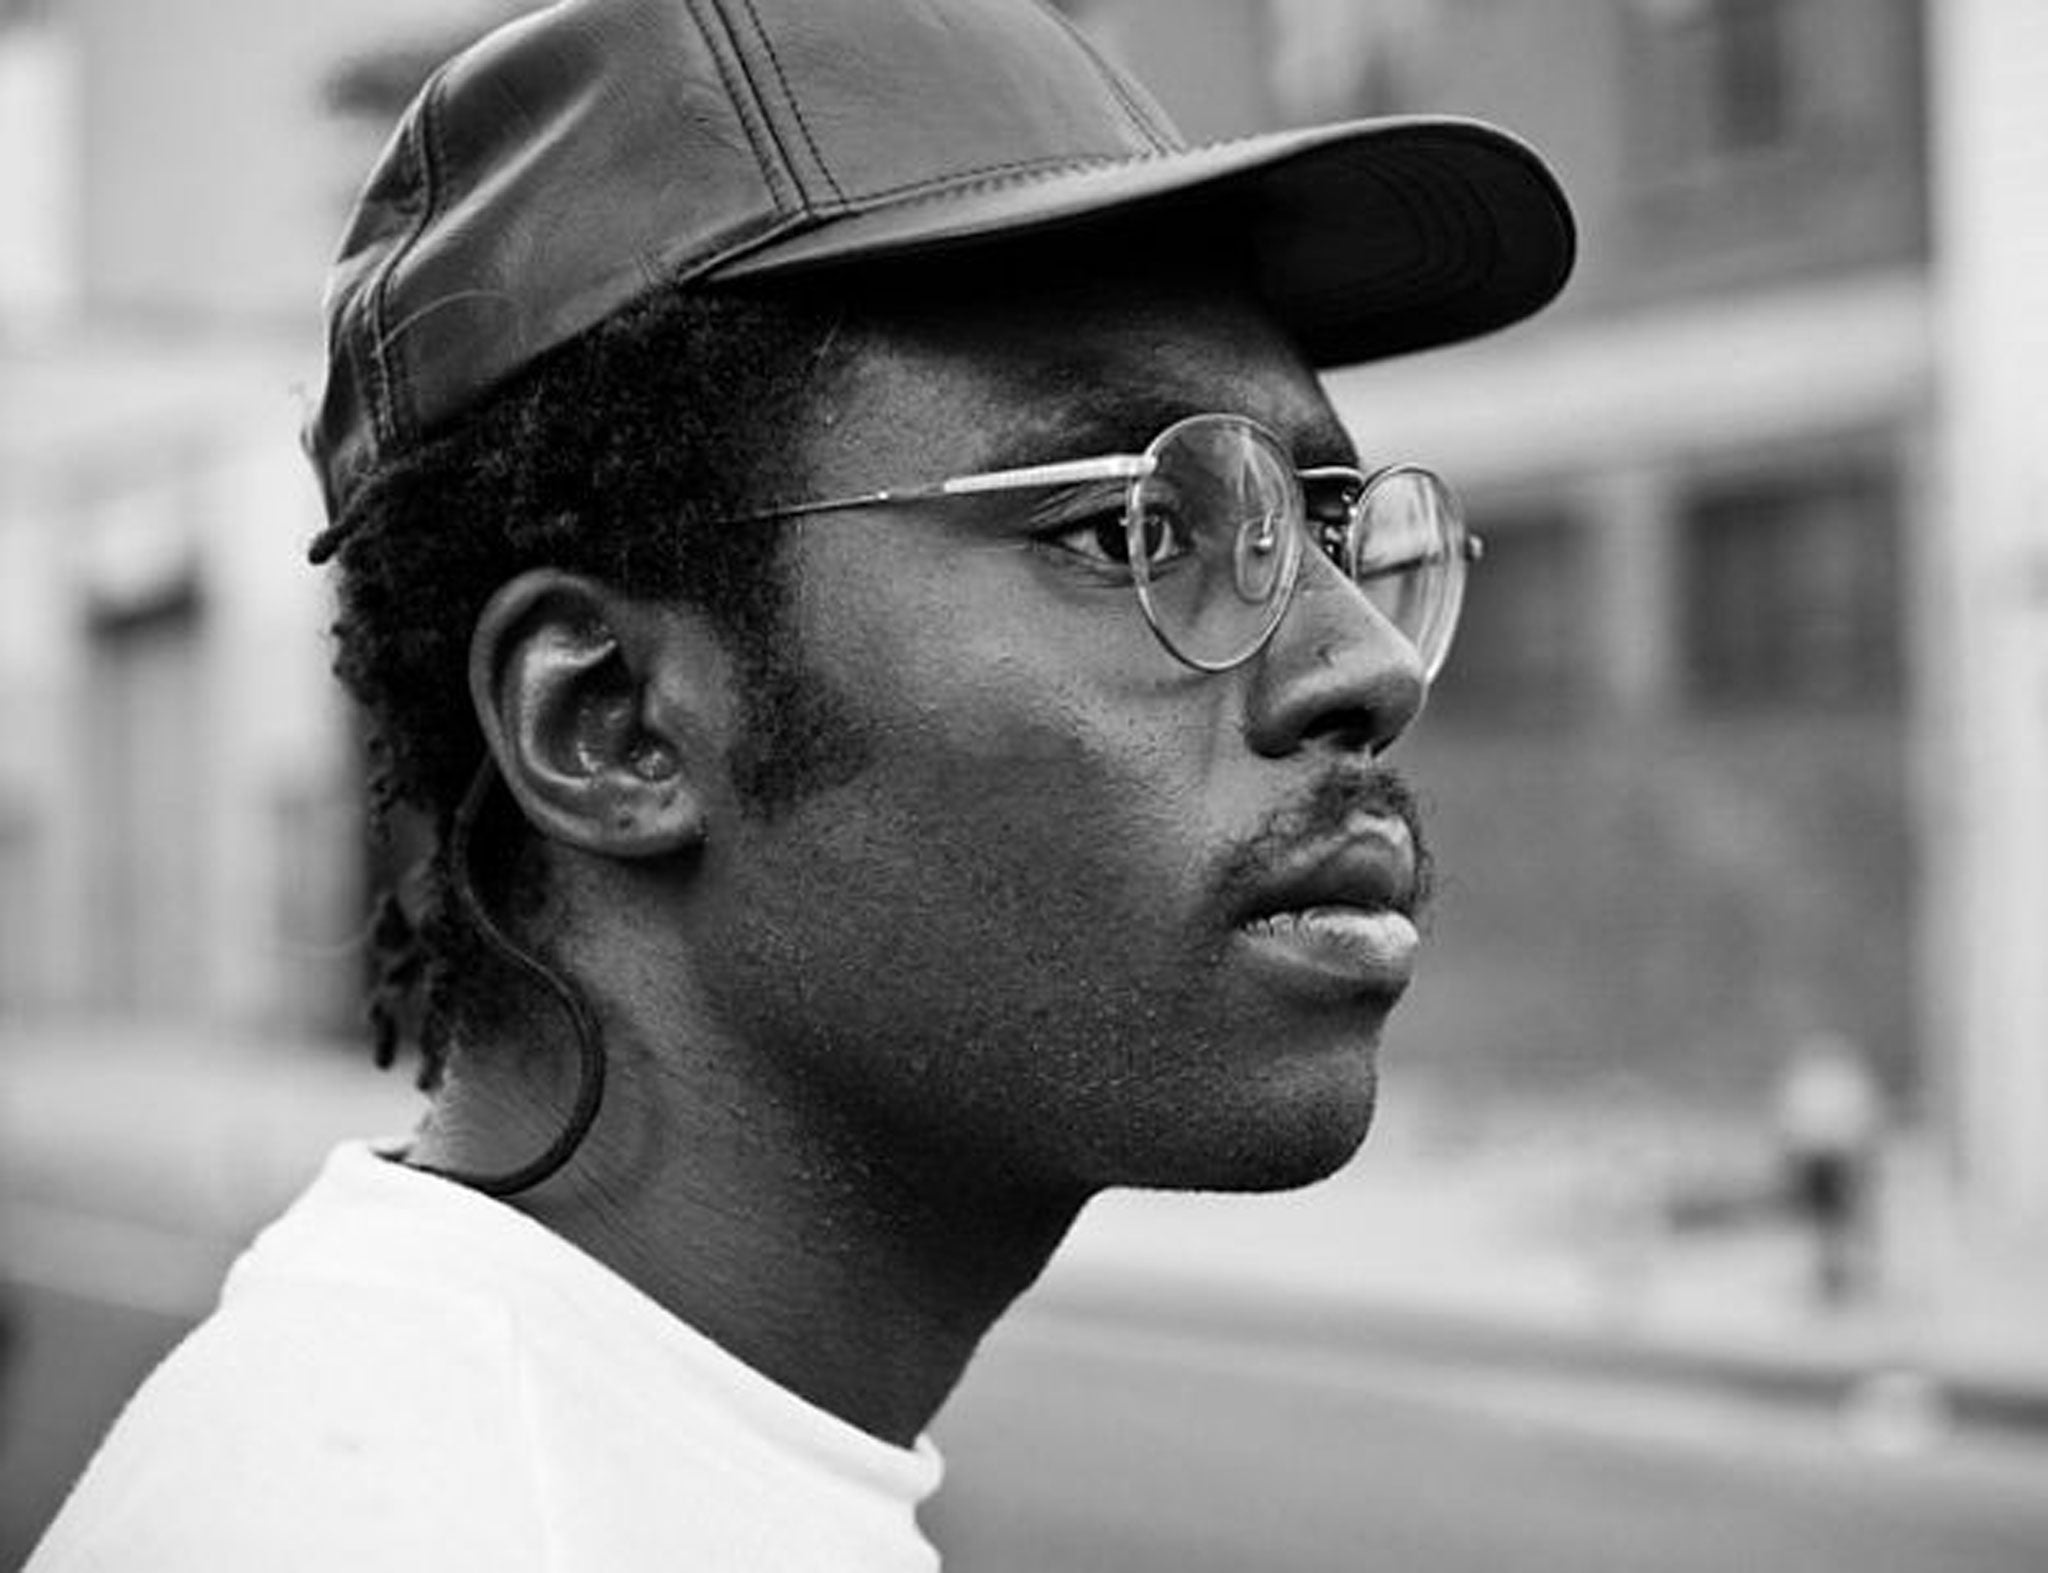 Dev Hynes is now firmly established as one of the most innovative and exciting musicians around